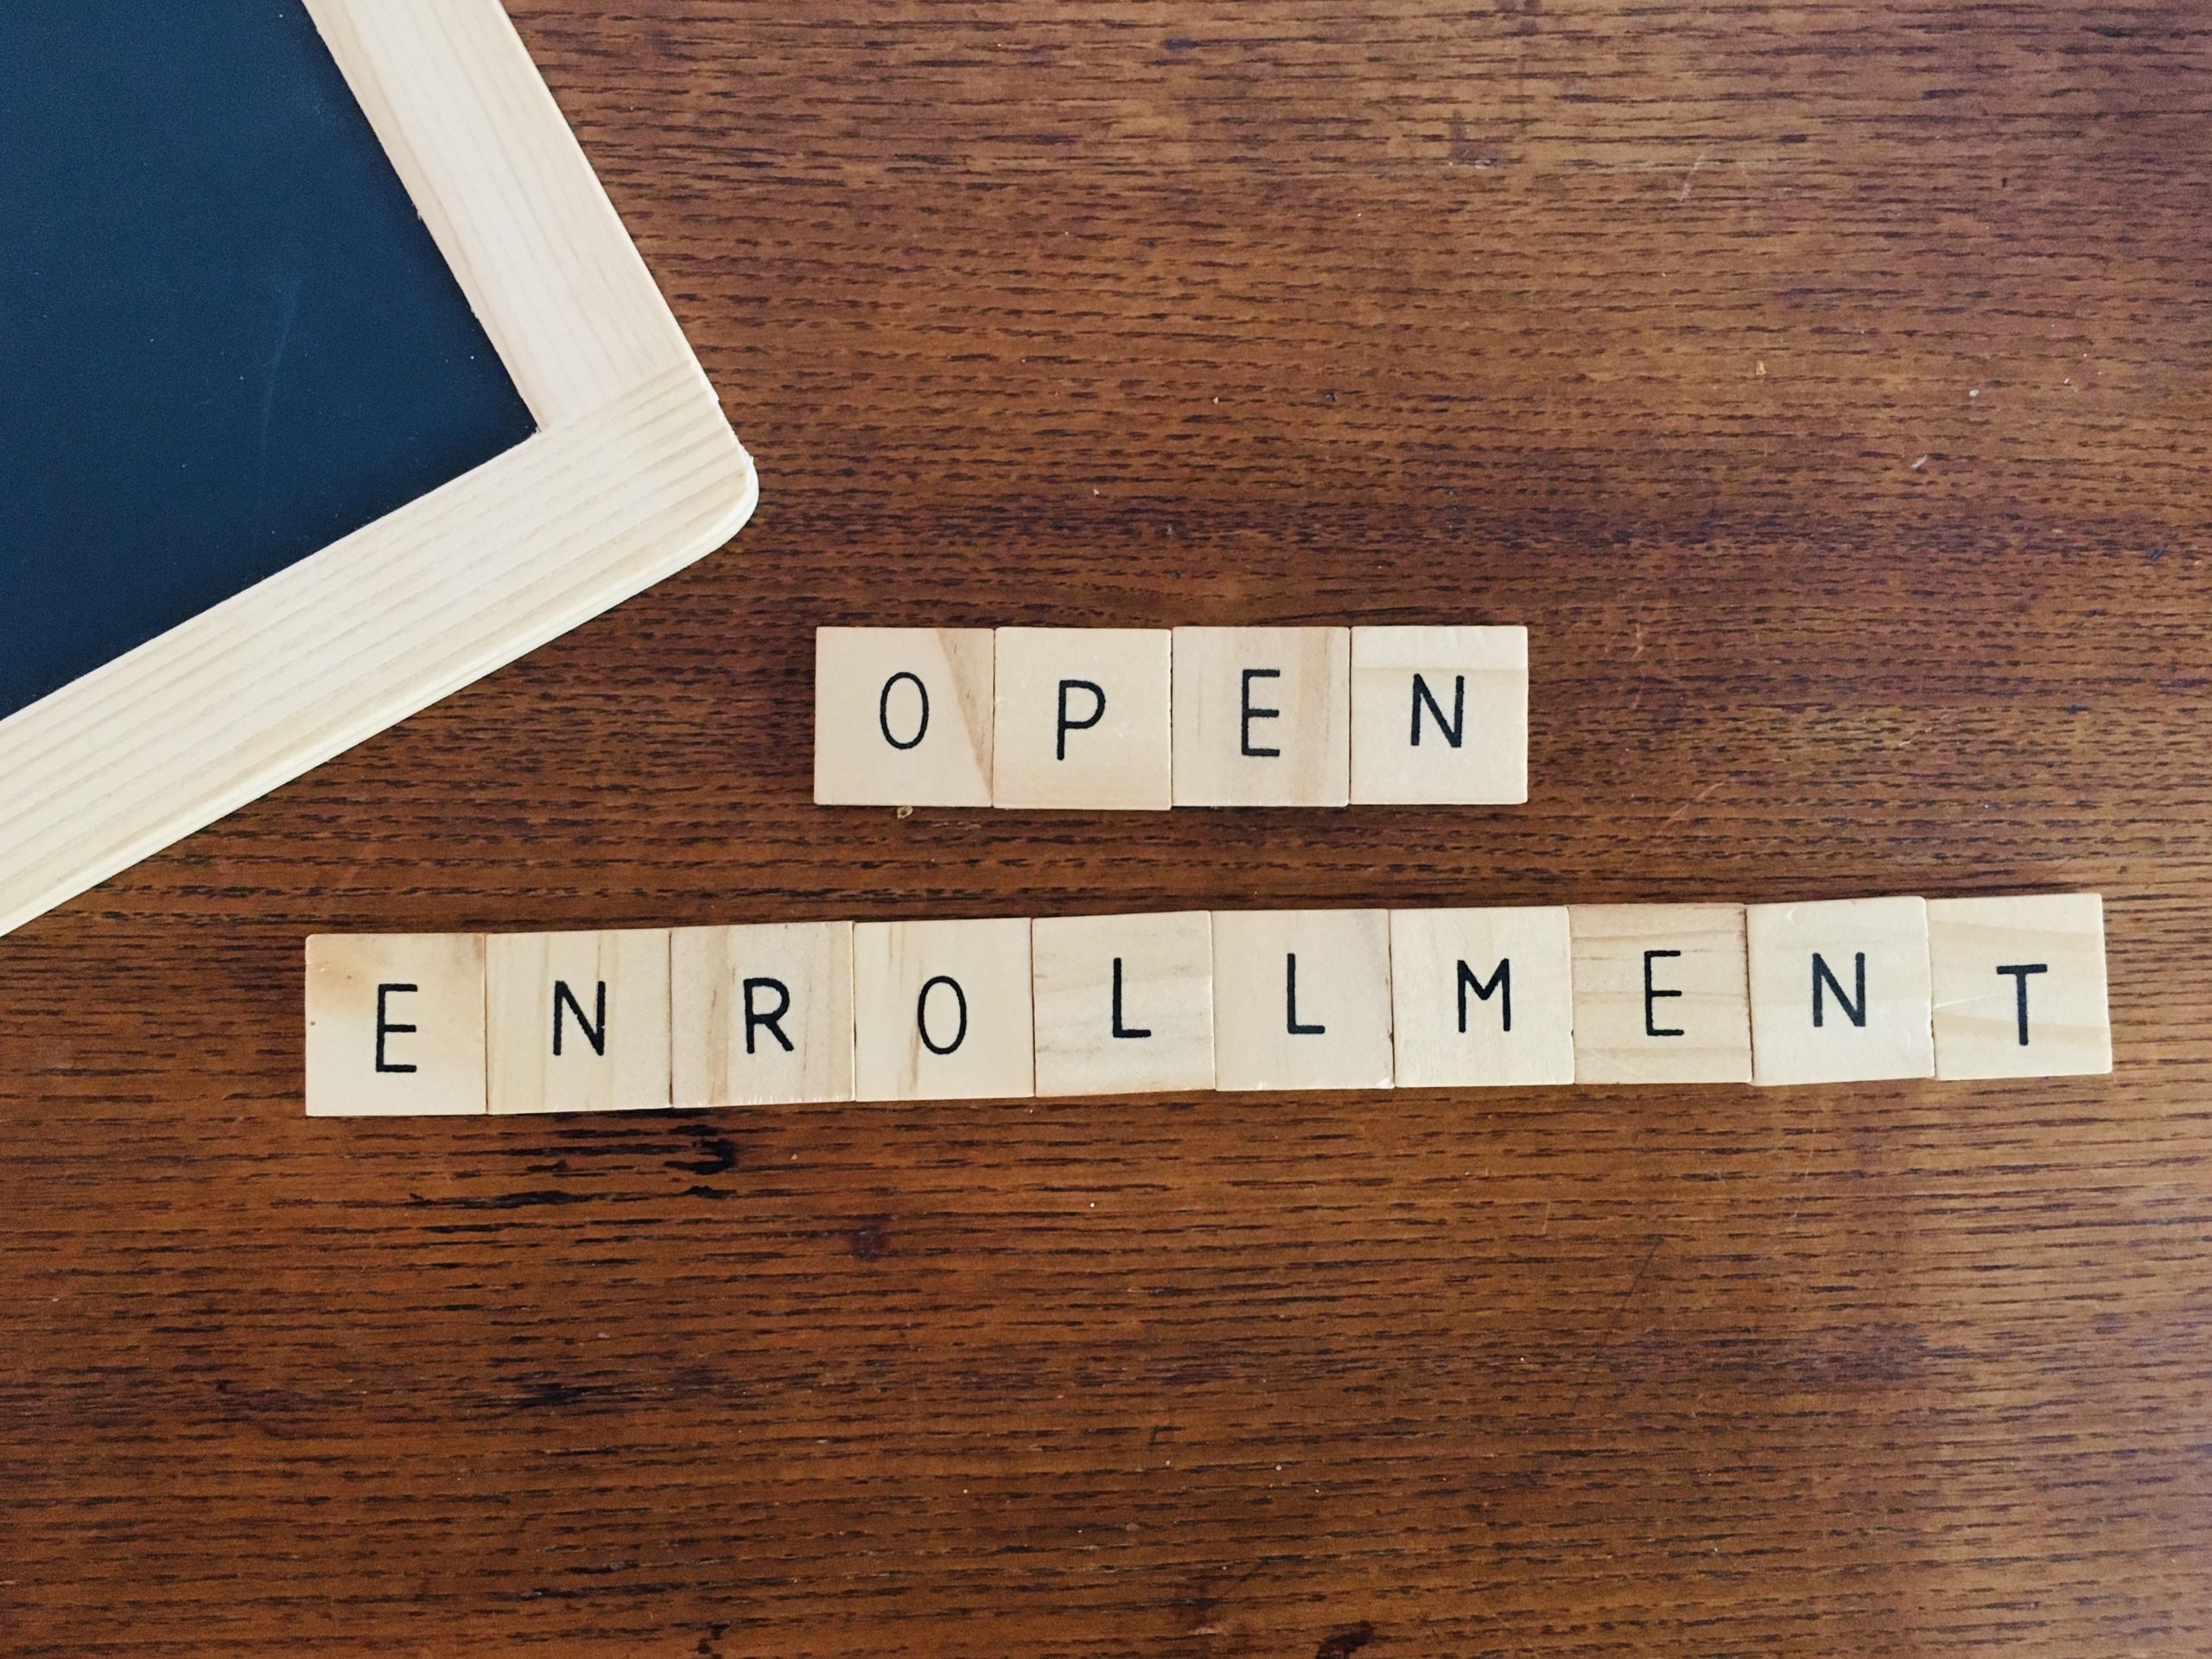 What You Need to Know About Medicare Open Enrollment